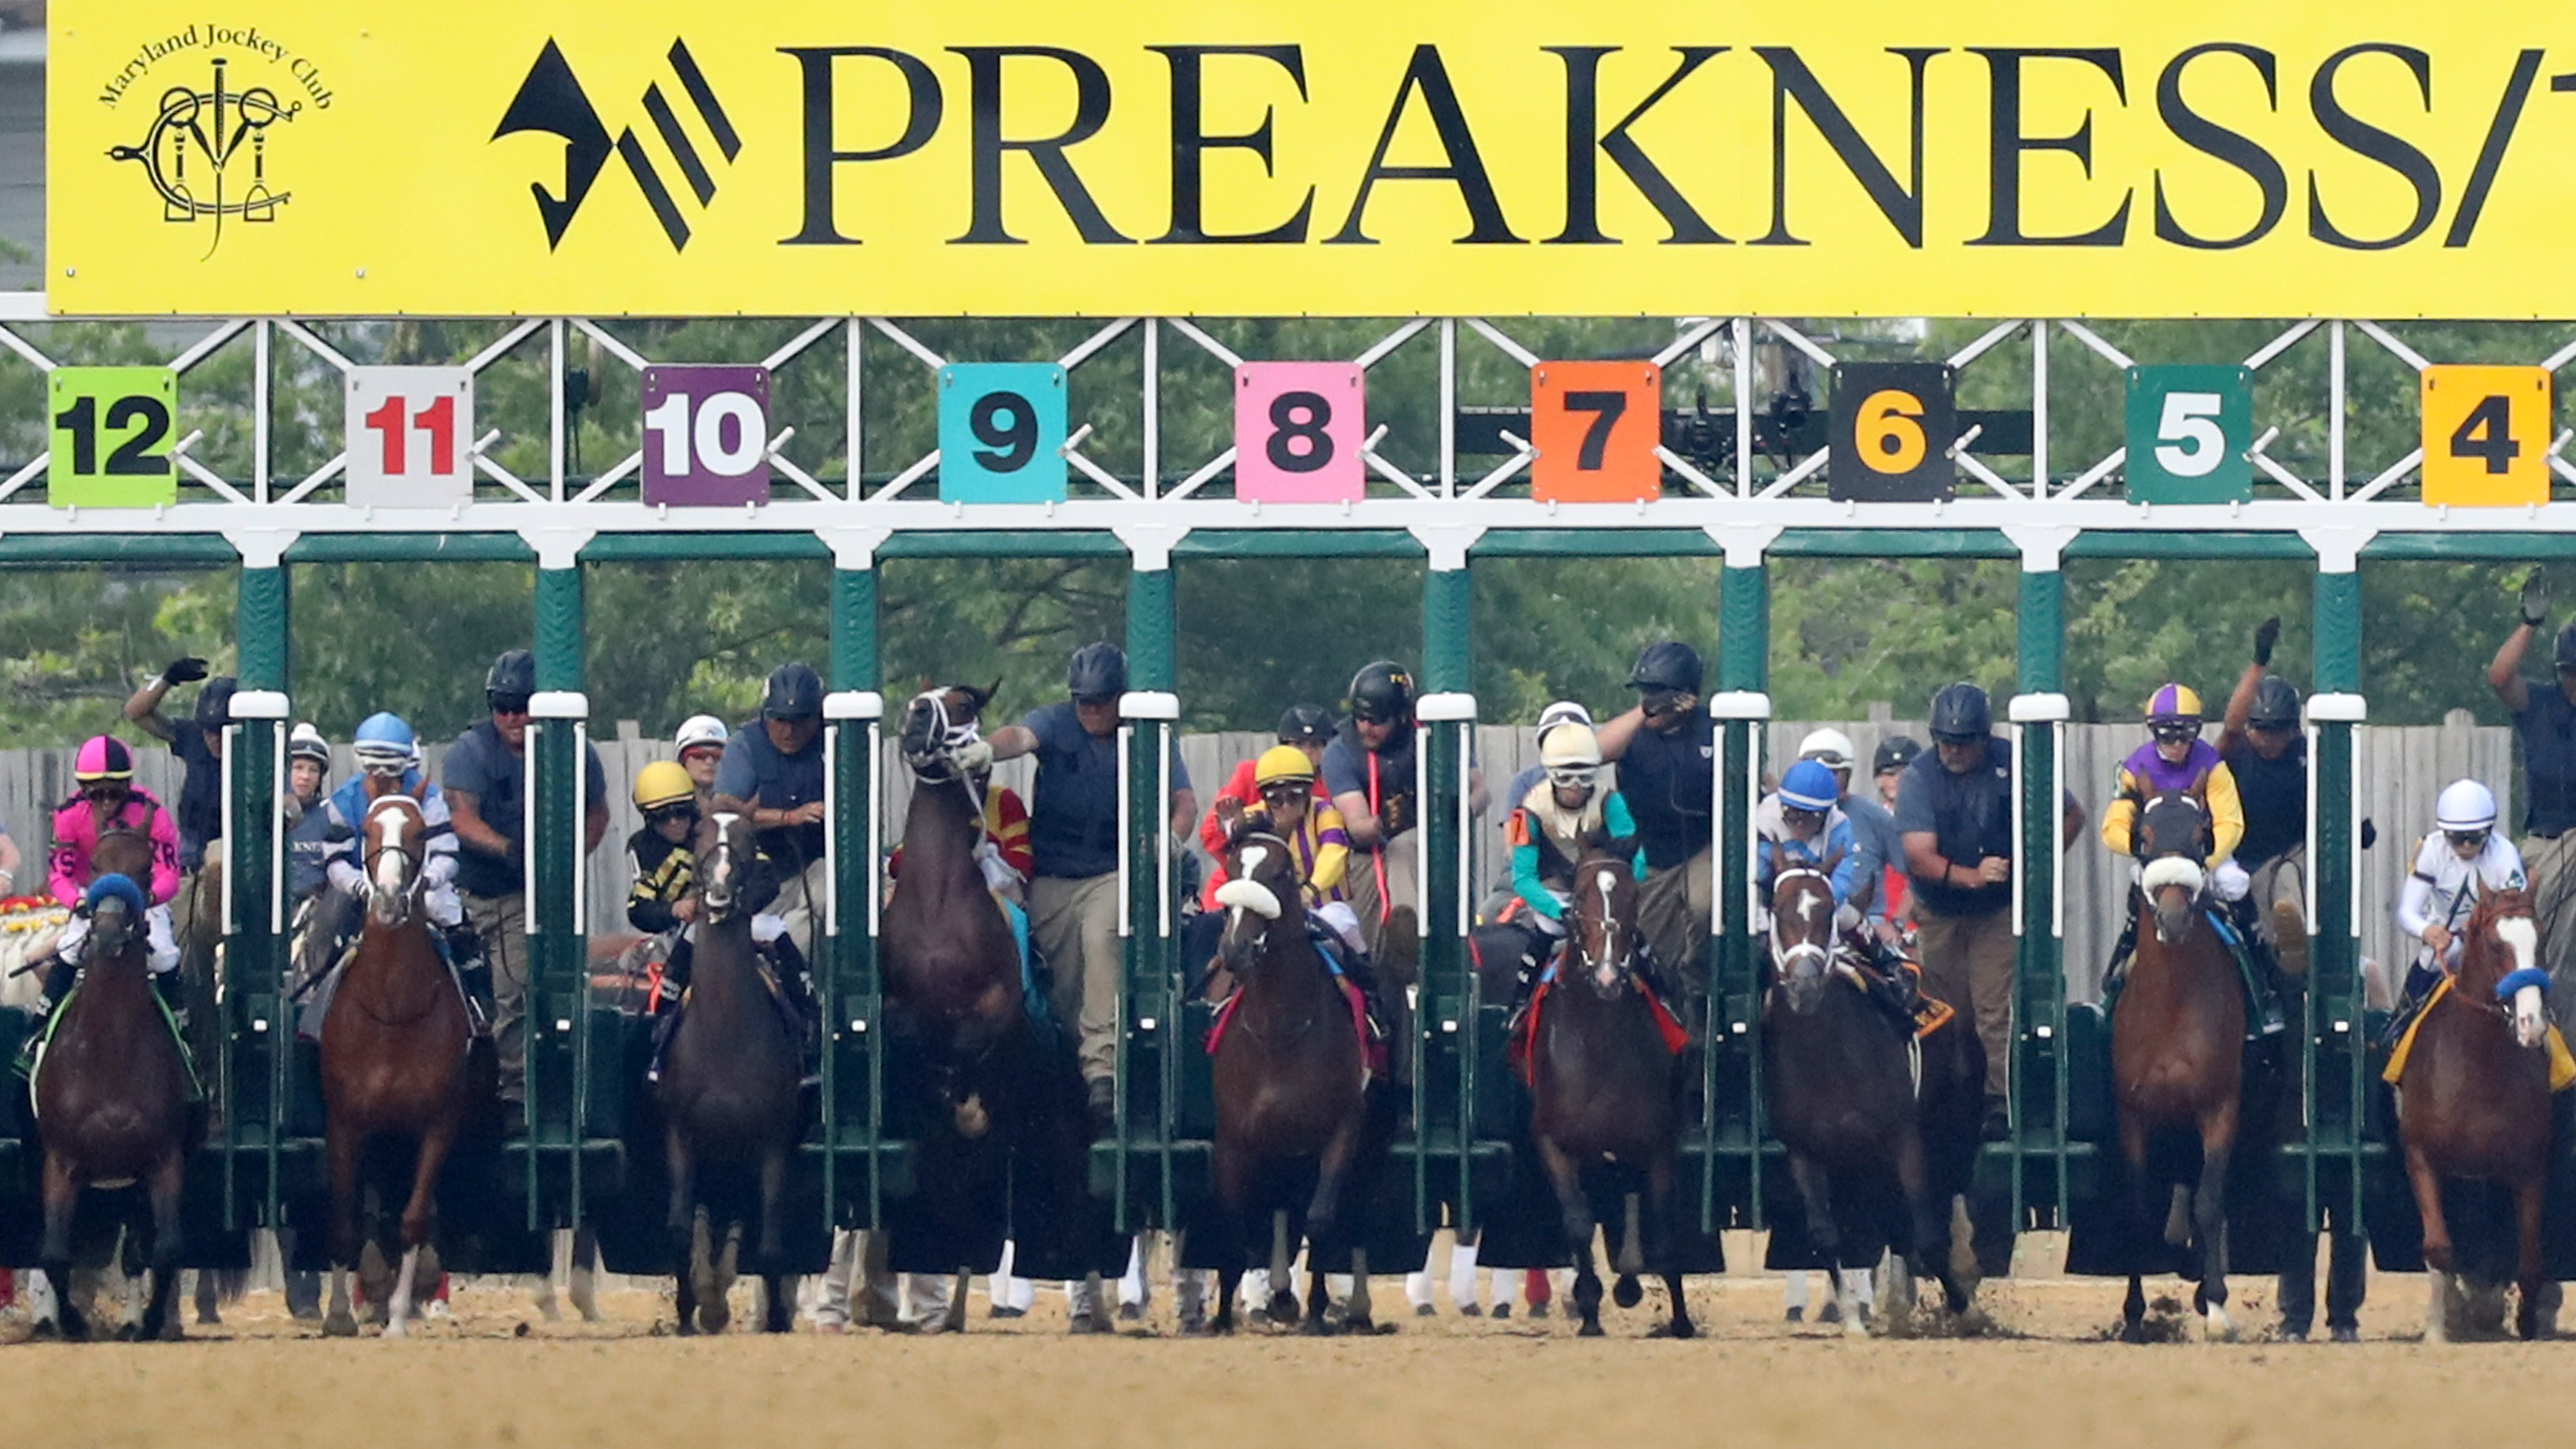 How to Watch Preakness Stakes on Roku or Other Device